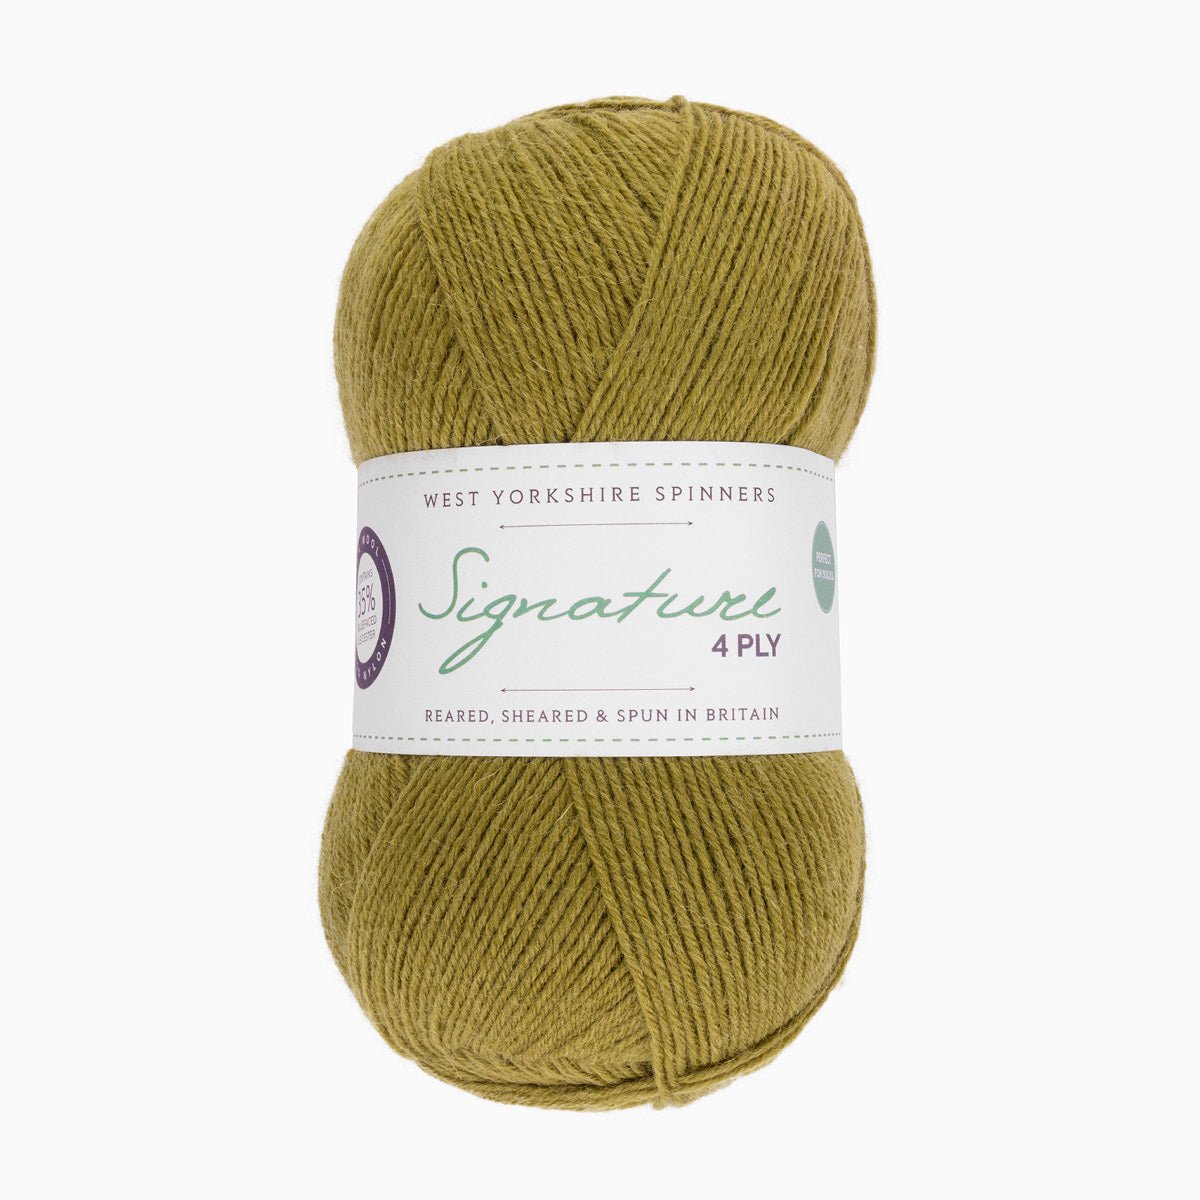 SIGNATURE 4PLY 351-Cardamom - West Yorkshire Spinners